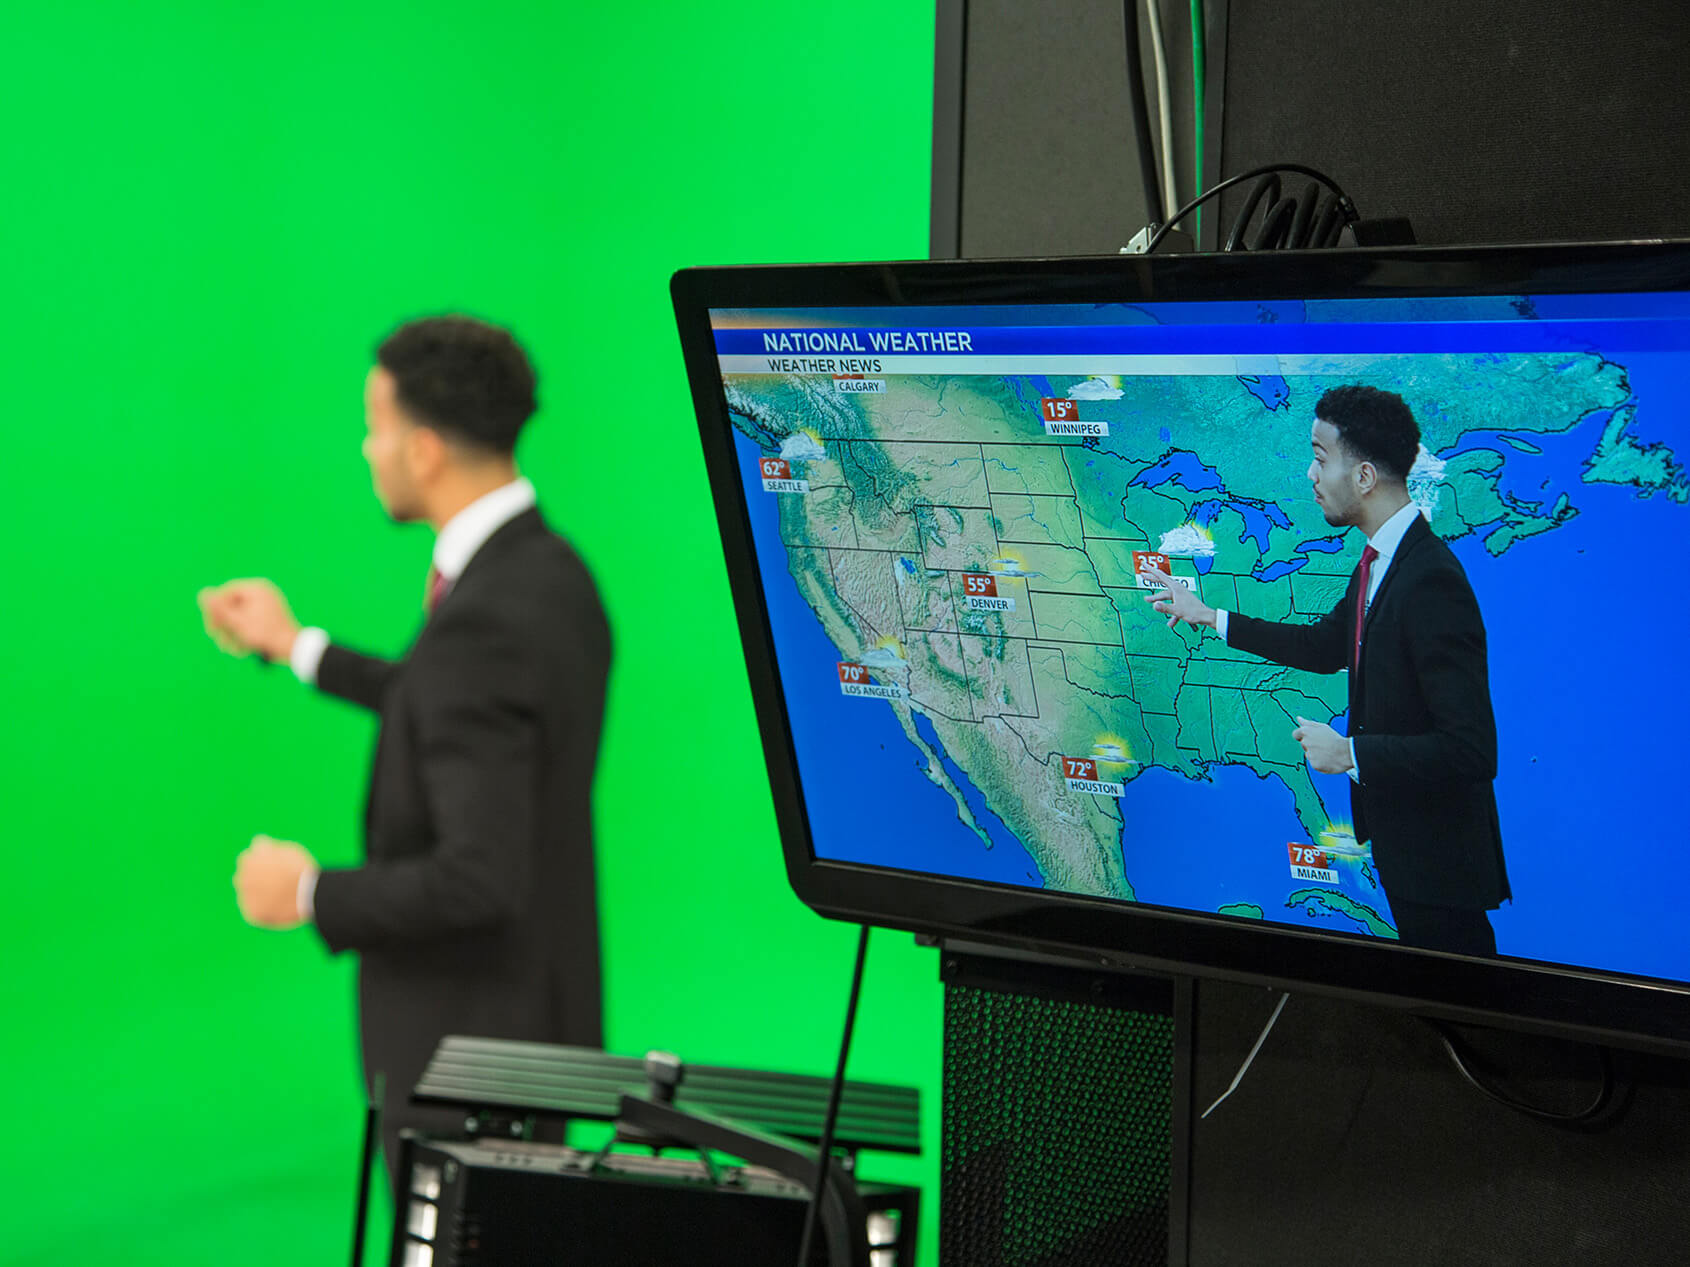 Meteorologist in front of green screen with monitor